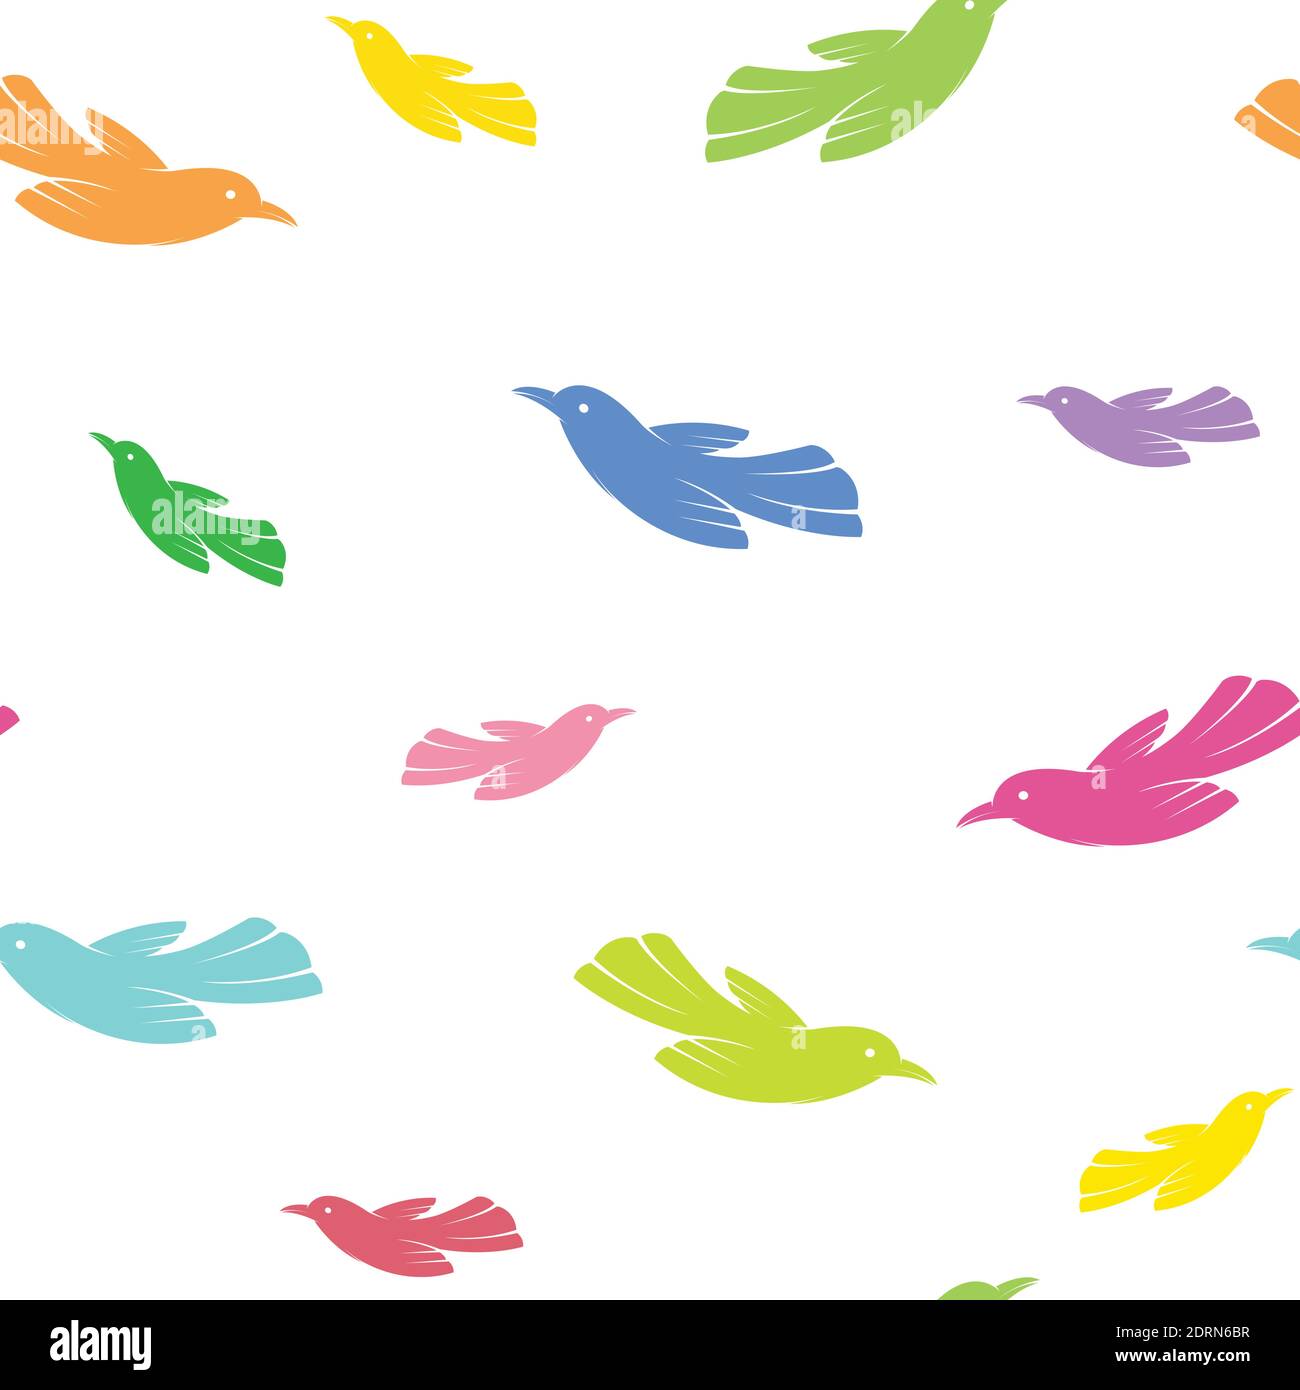 Bird vector art background design for fabric and decor. Seamless pattern. Easy editable layered vector illustration. Stock Vector